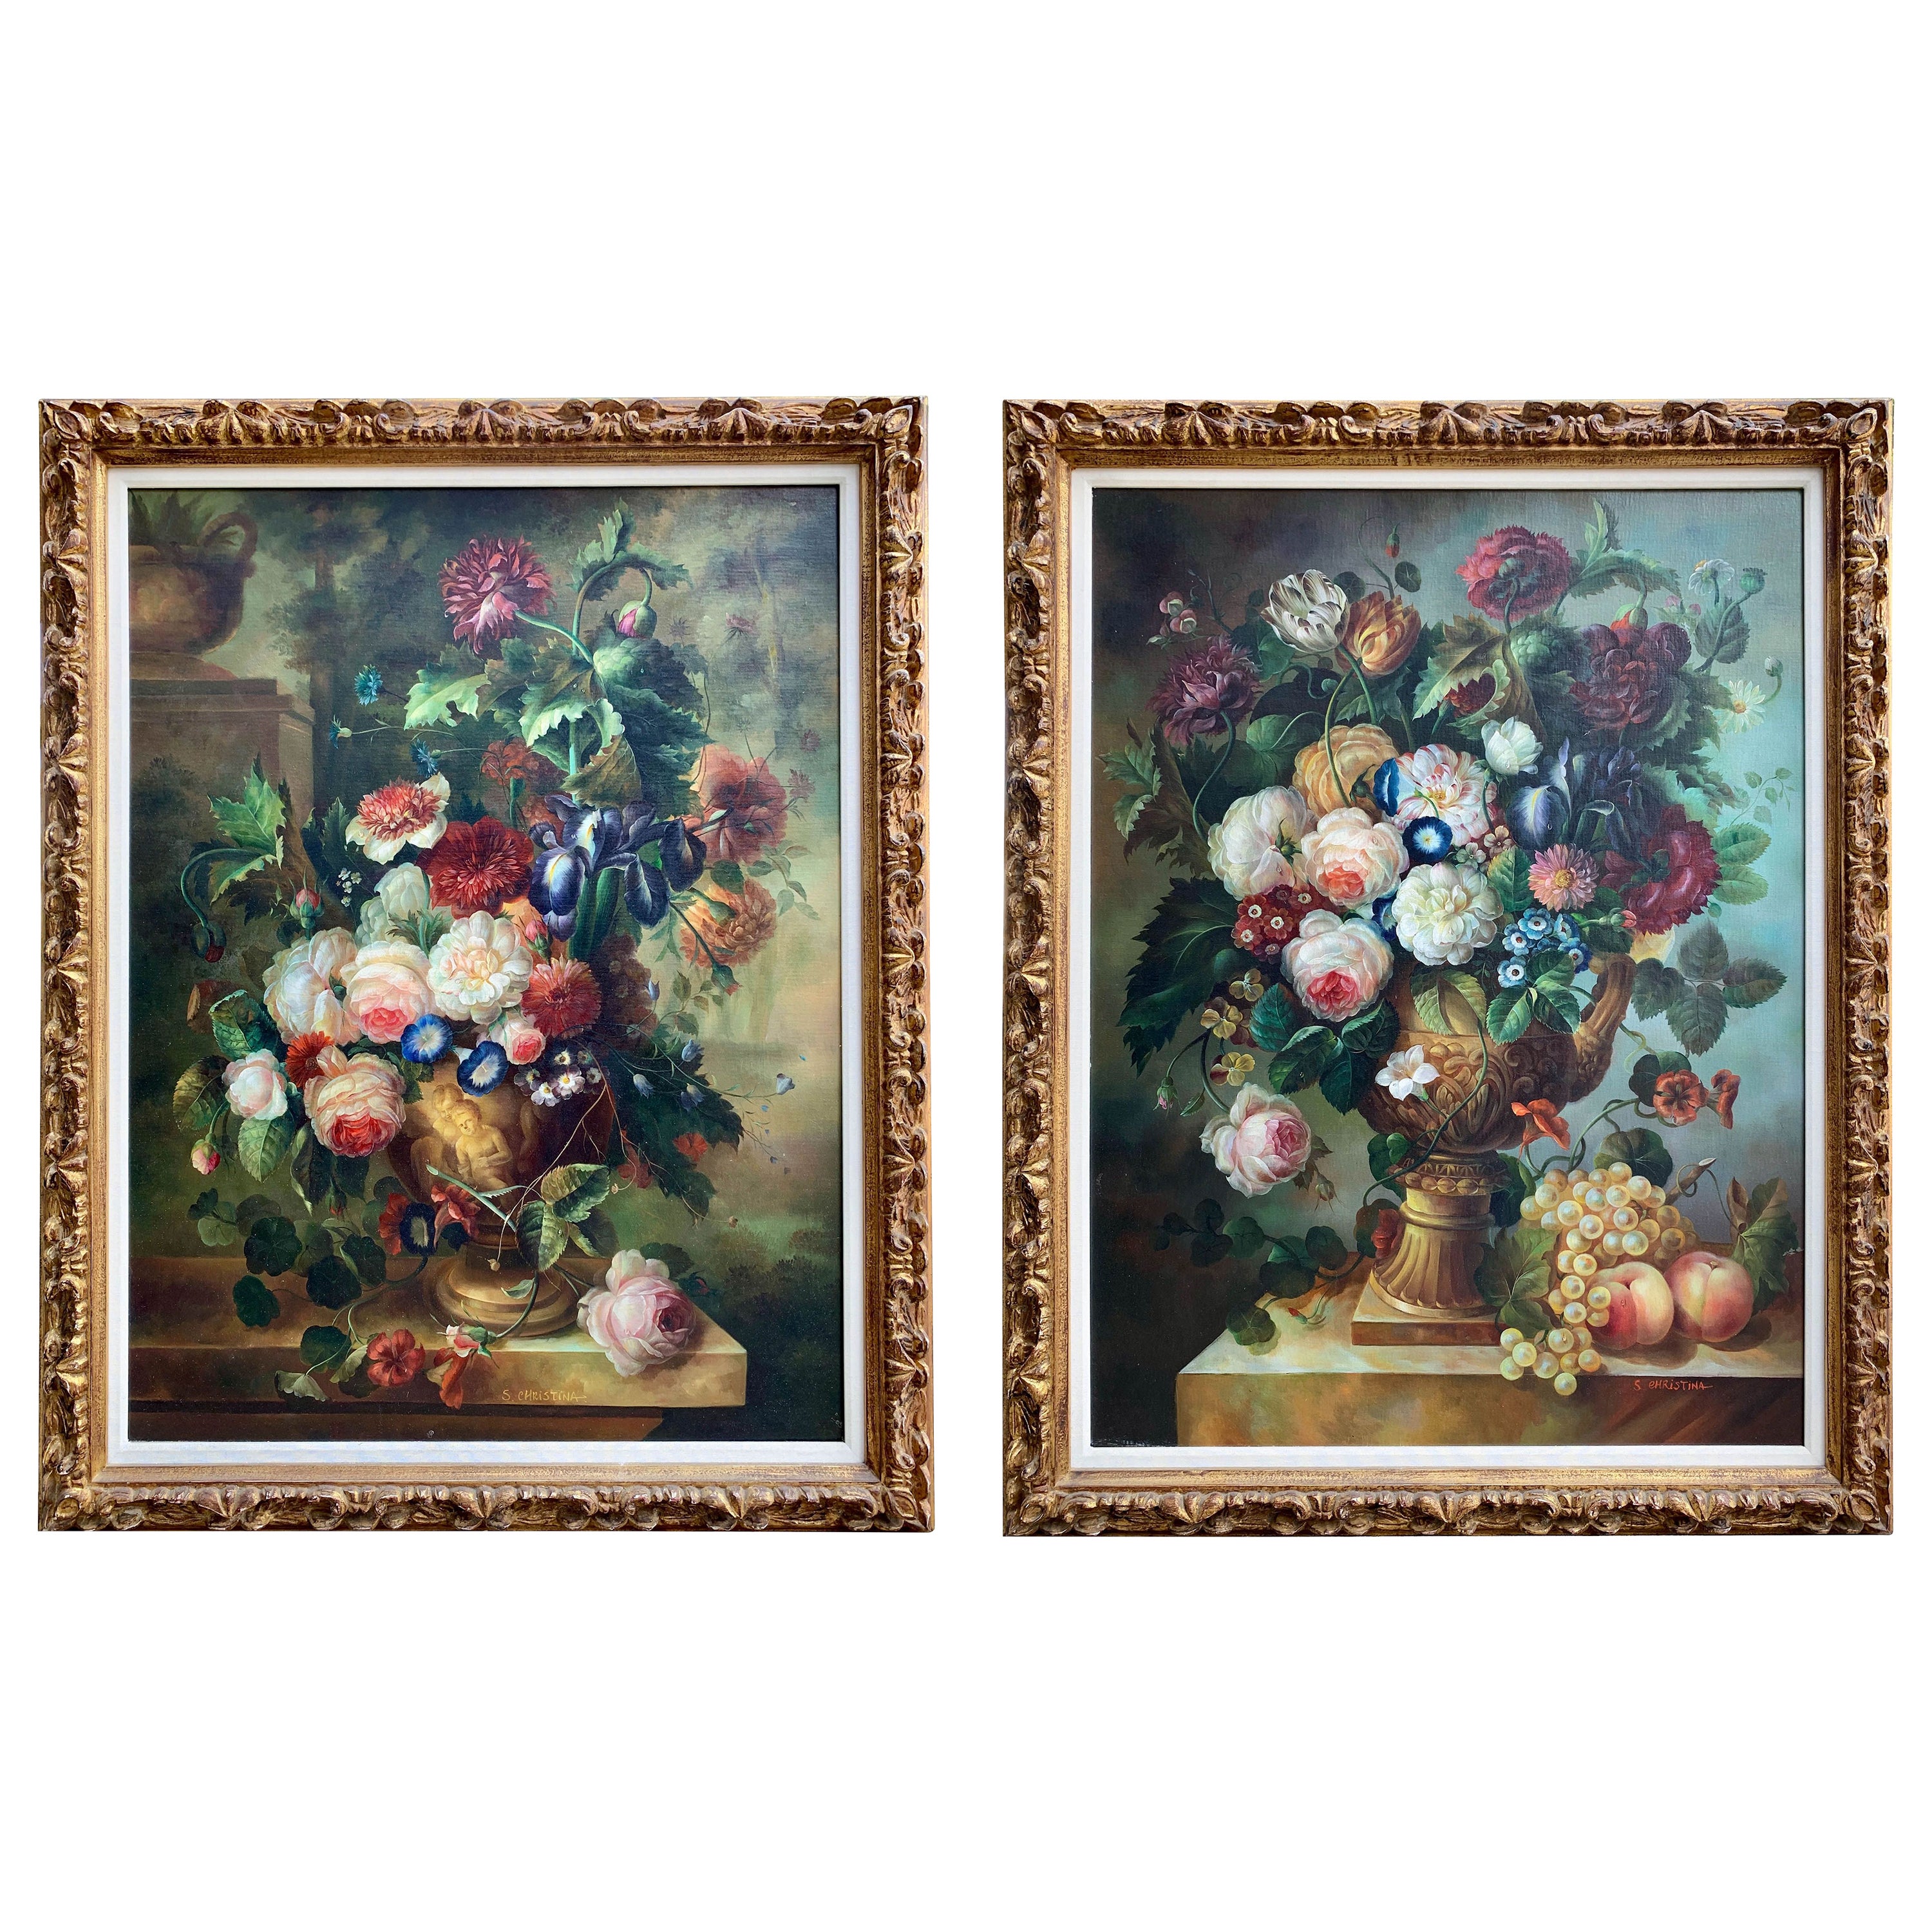 Pair of Large Still Life Oil Paintings of Flowers in Urns